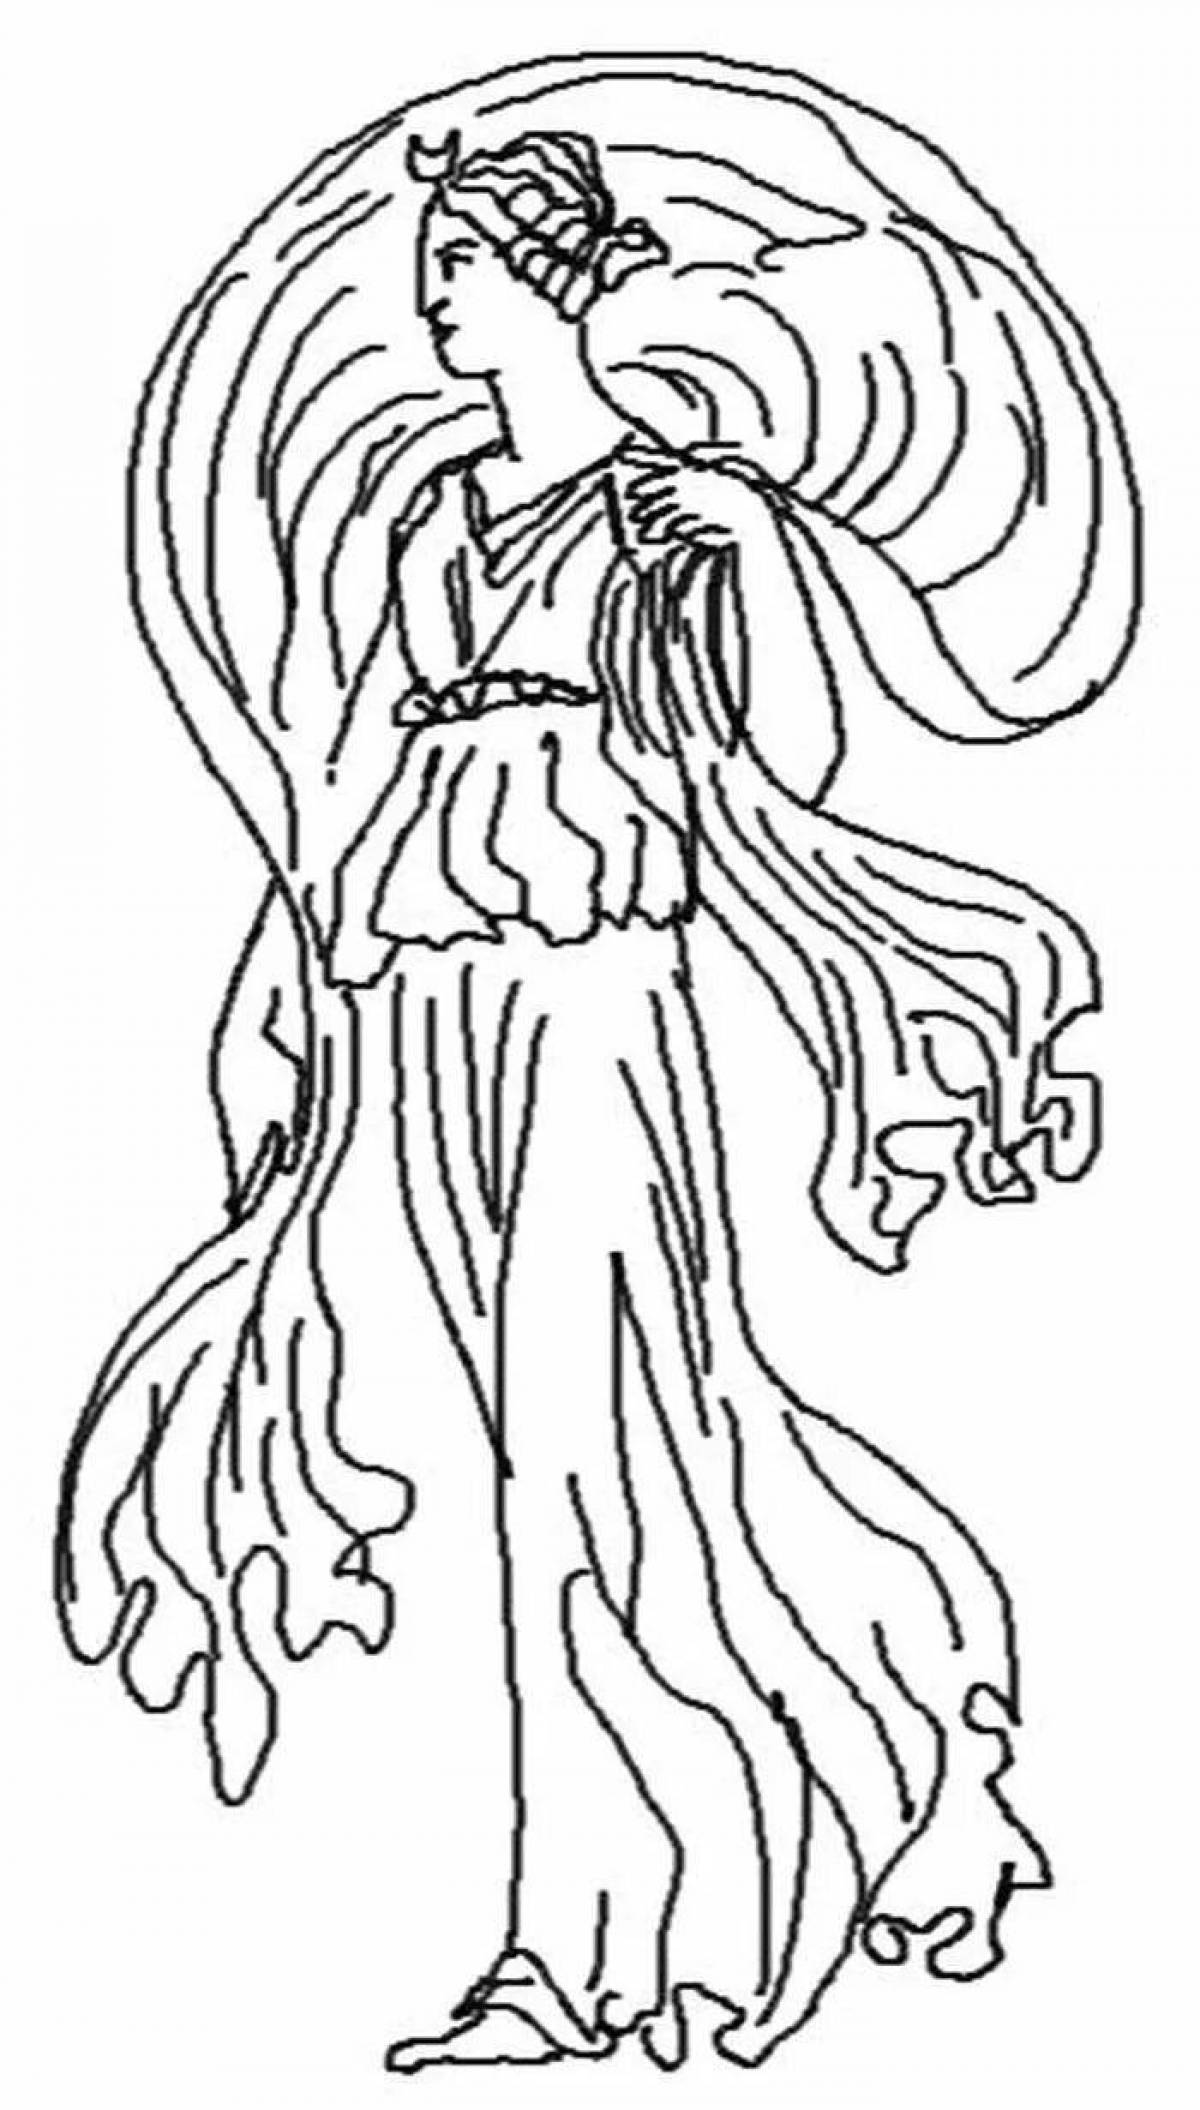 Coloring page divine Eurydice and Orpheus